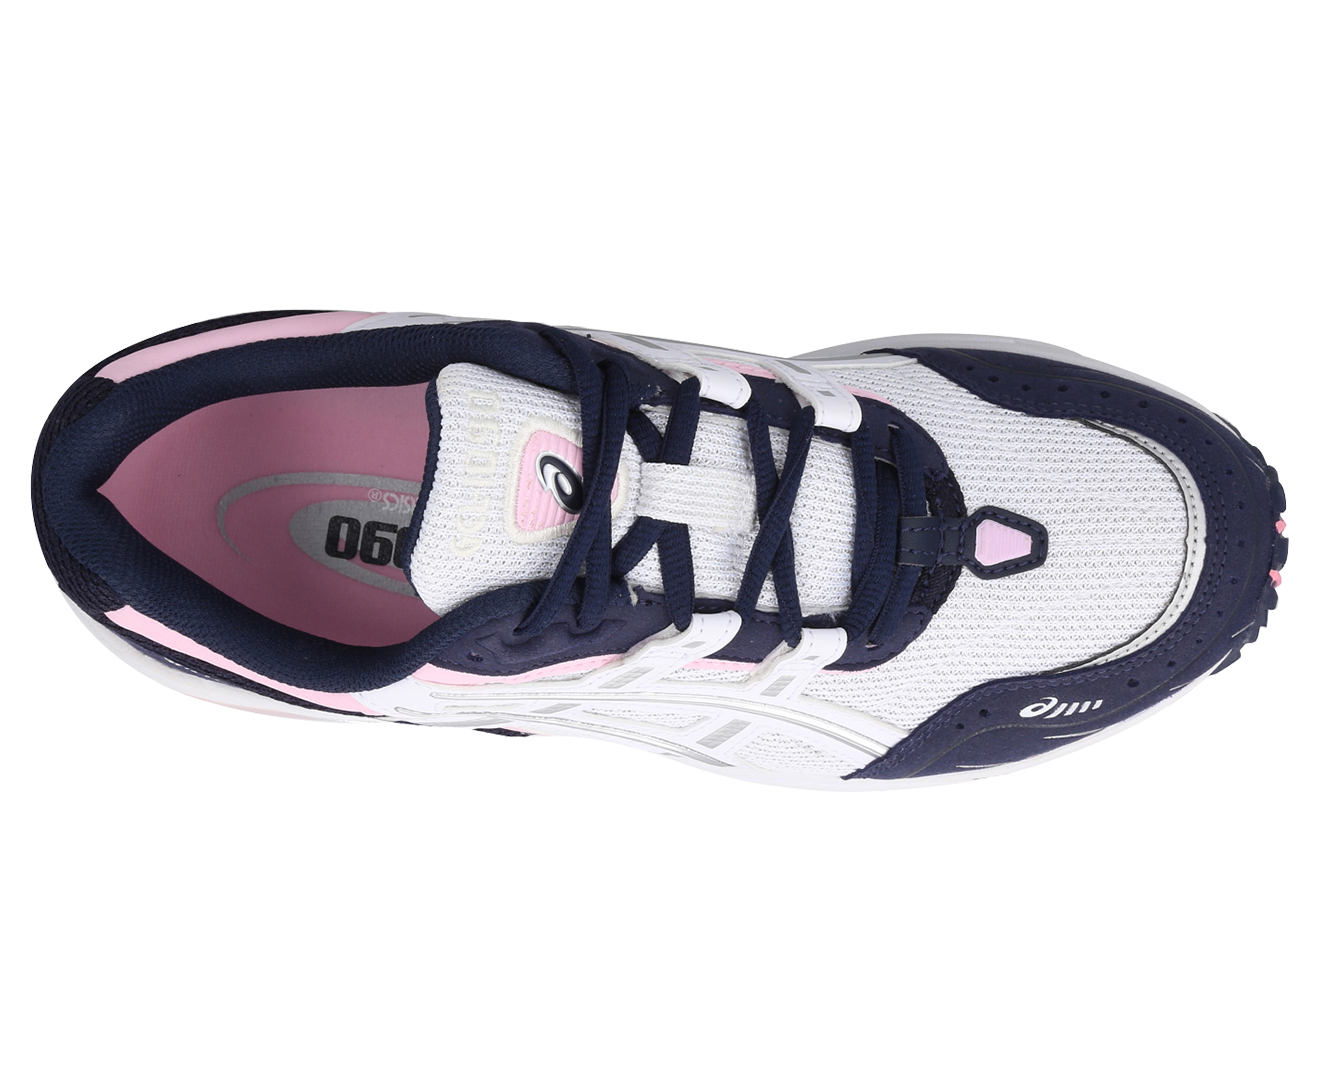 ASICS Women's Gel-1090 Sportstyle Shoes - White/Pink/Pure Silver ...